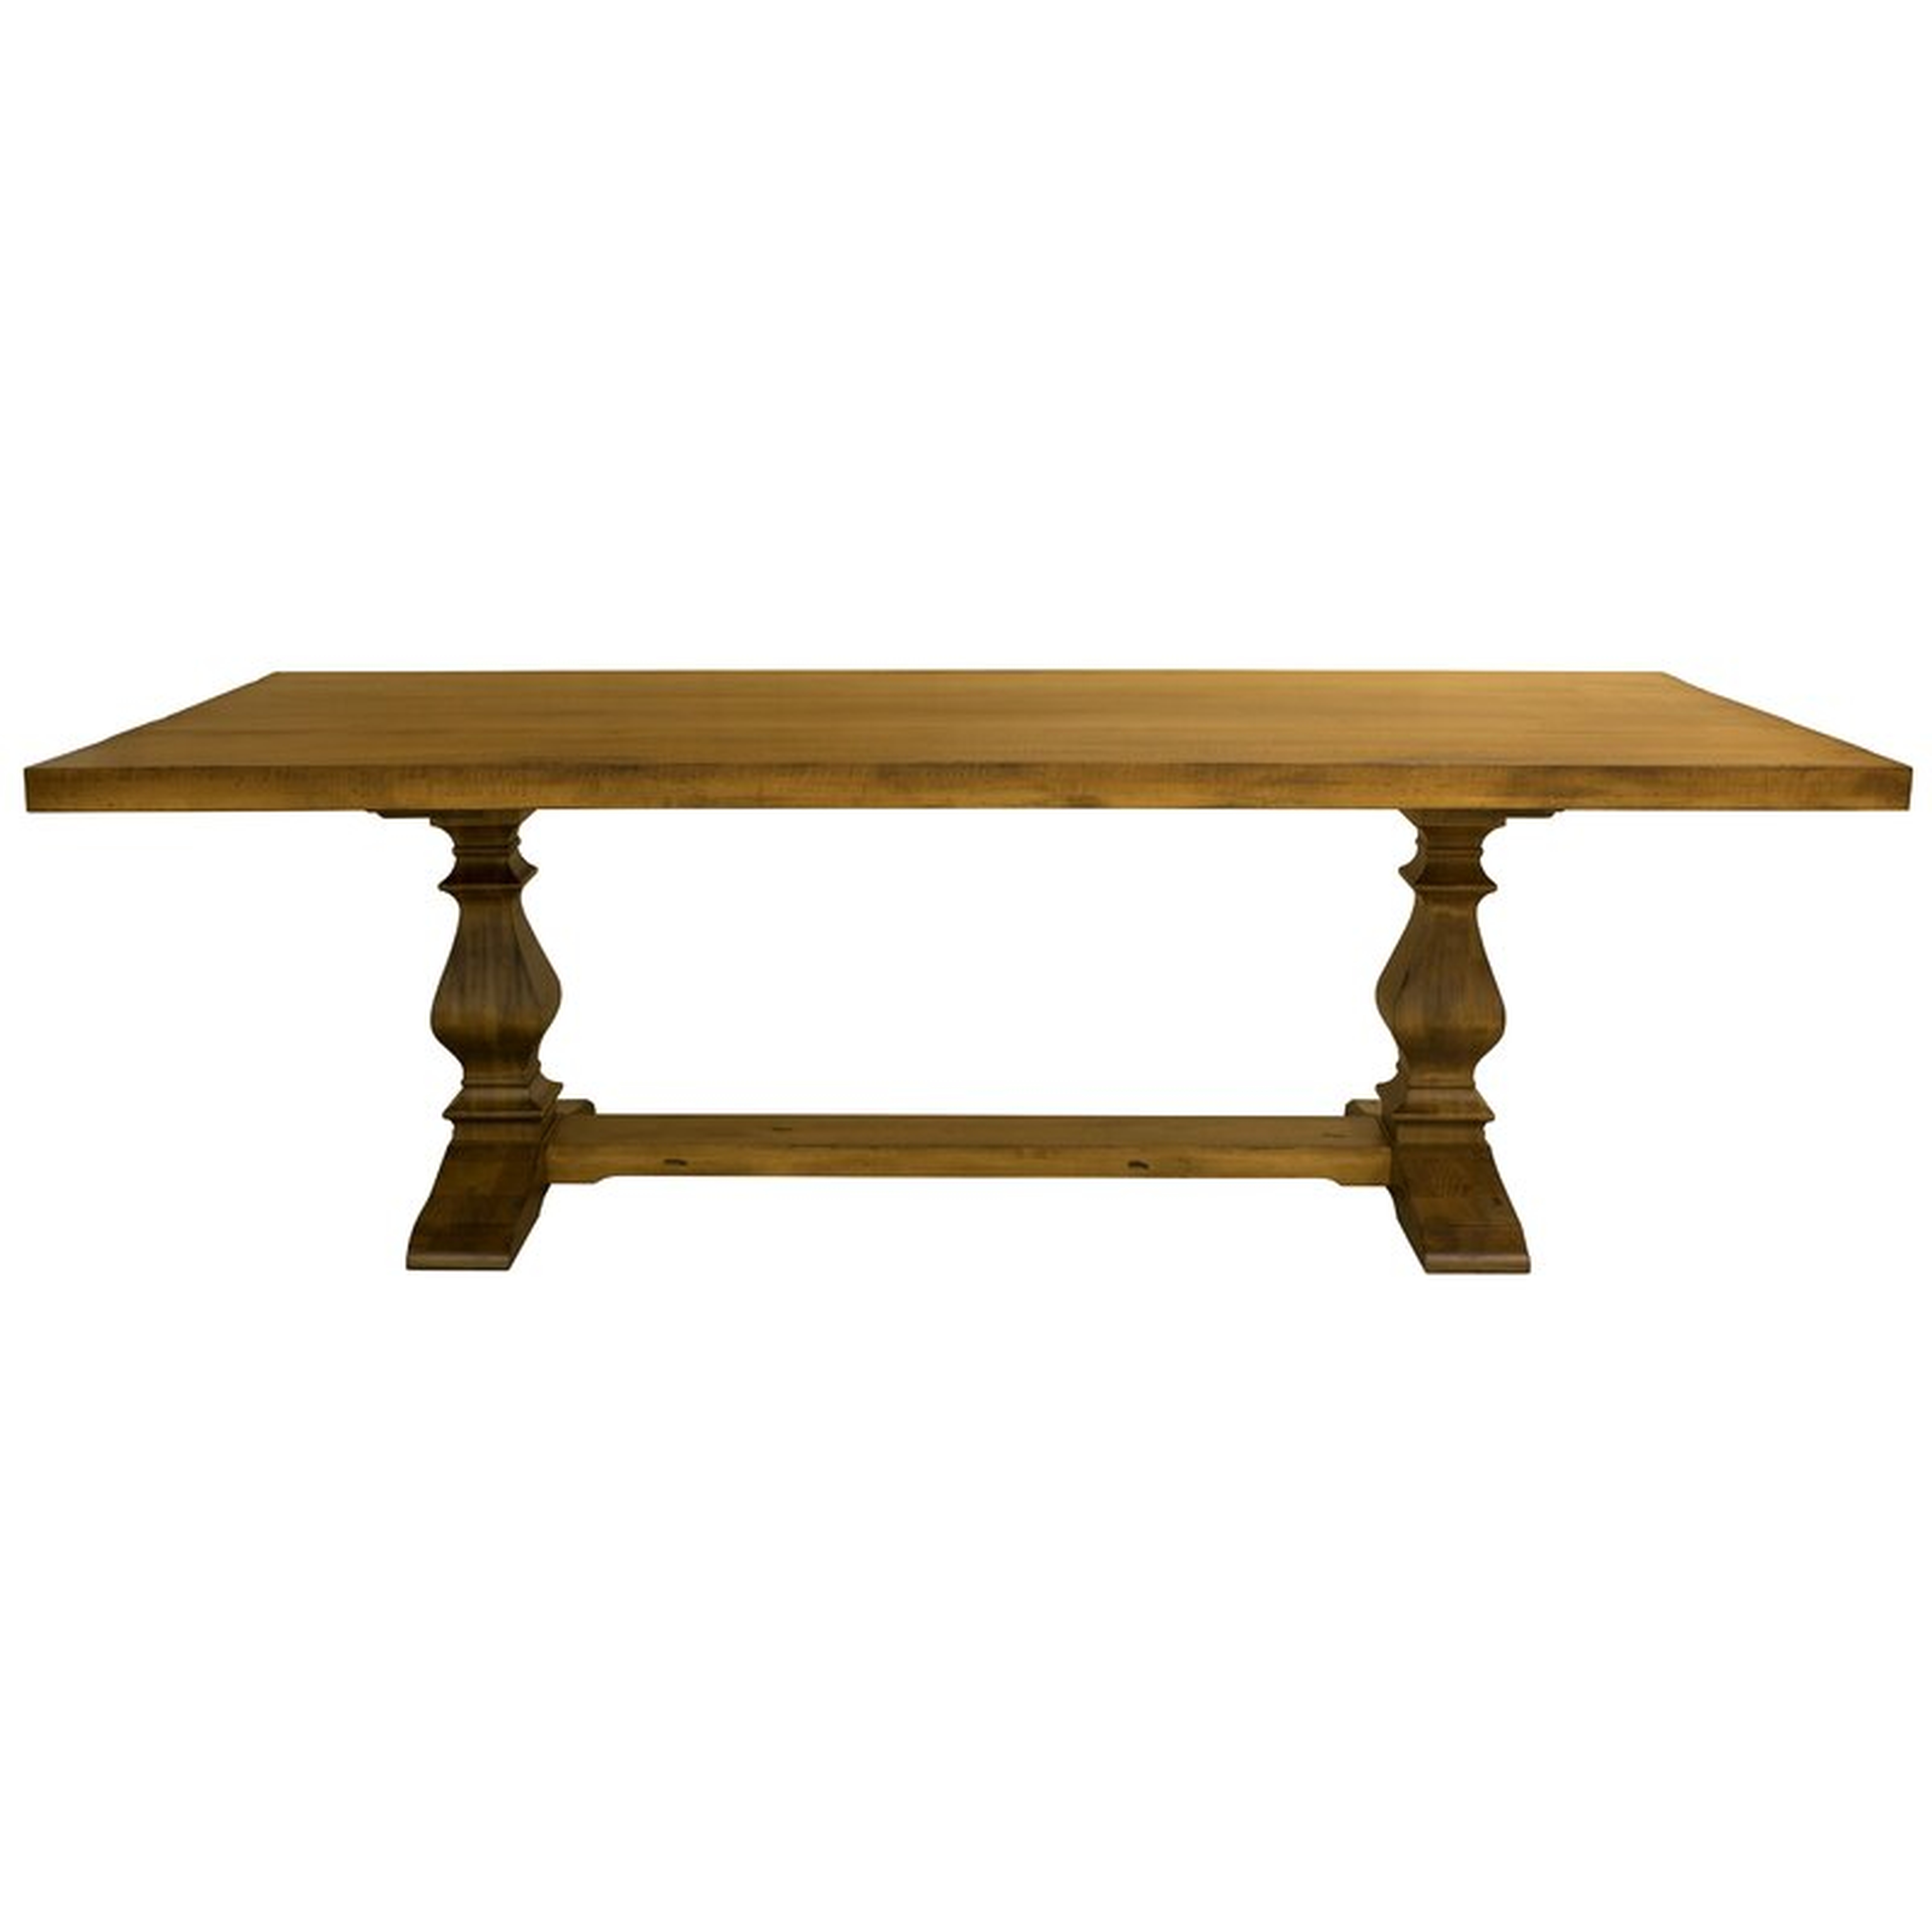 Ashford Maple Dining Table Color: Distressed Flax, Size: 29.75" H x 96" W x 42" D - Perigold